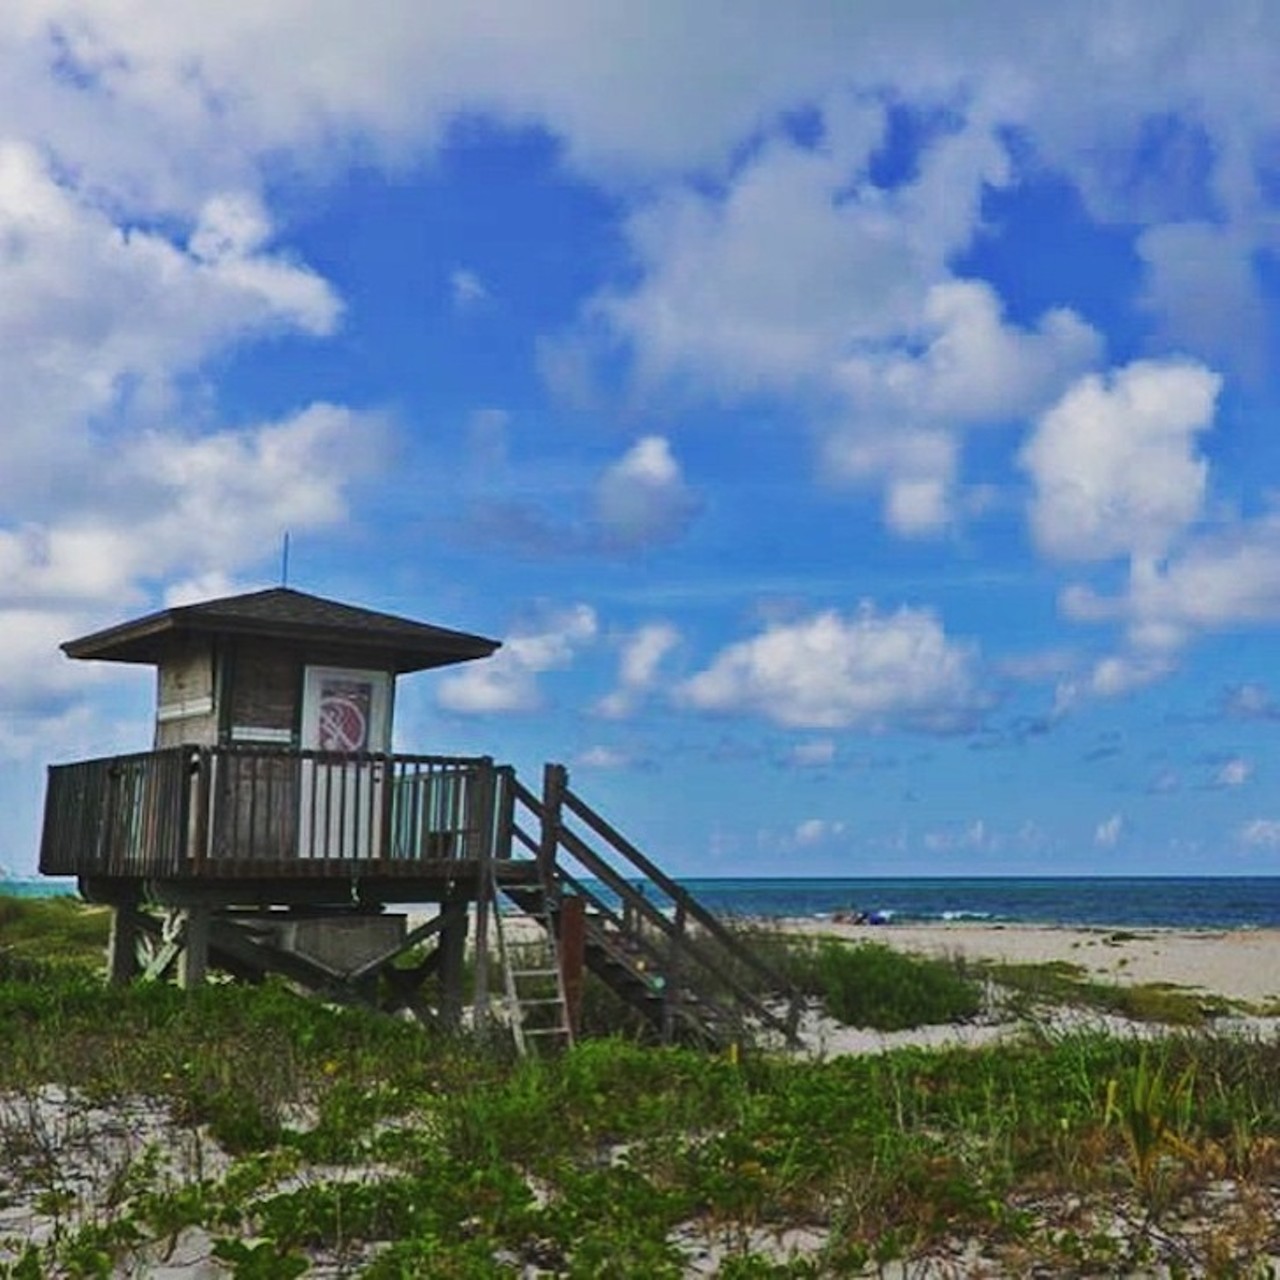 Round Island Beach Park
Round Island has some of the best observation decks in the state, so you don't have to tire yourself out in a kayak to see a school of Florida manatees. Pull the boat up to one of their ramps and go fishin'.
1 hour and 55 minutes
Photo via _chrisgent/Instagram